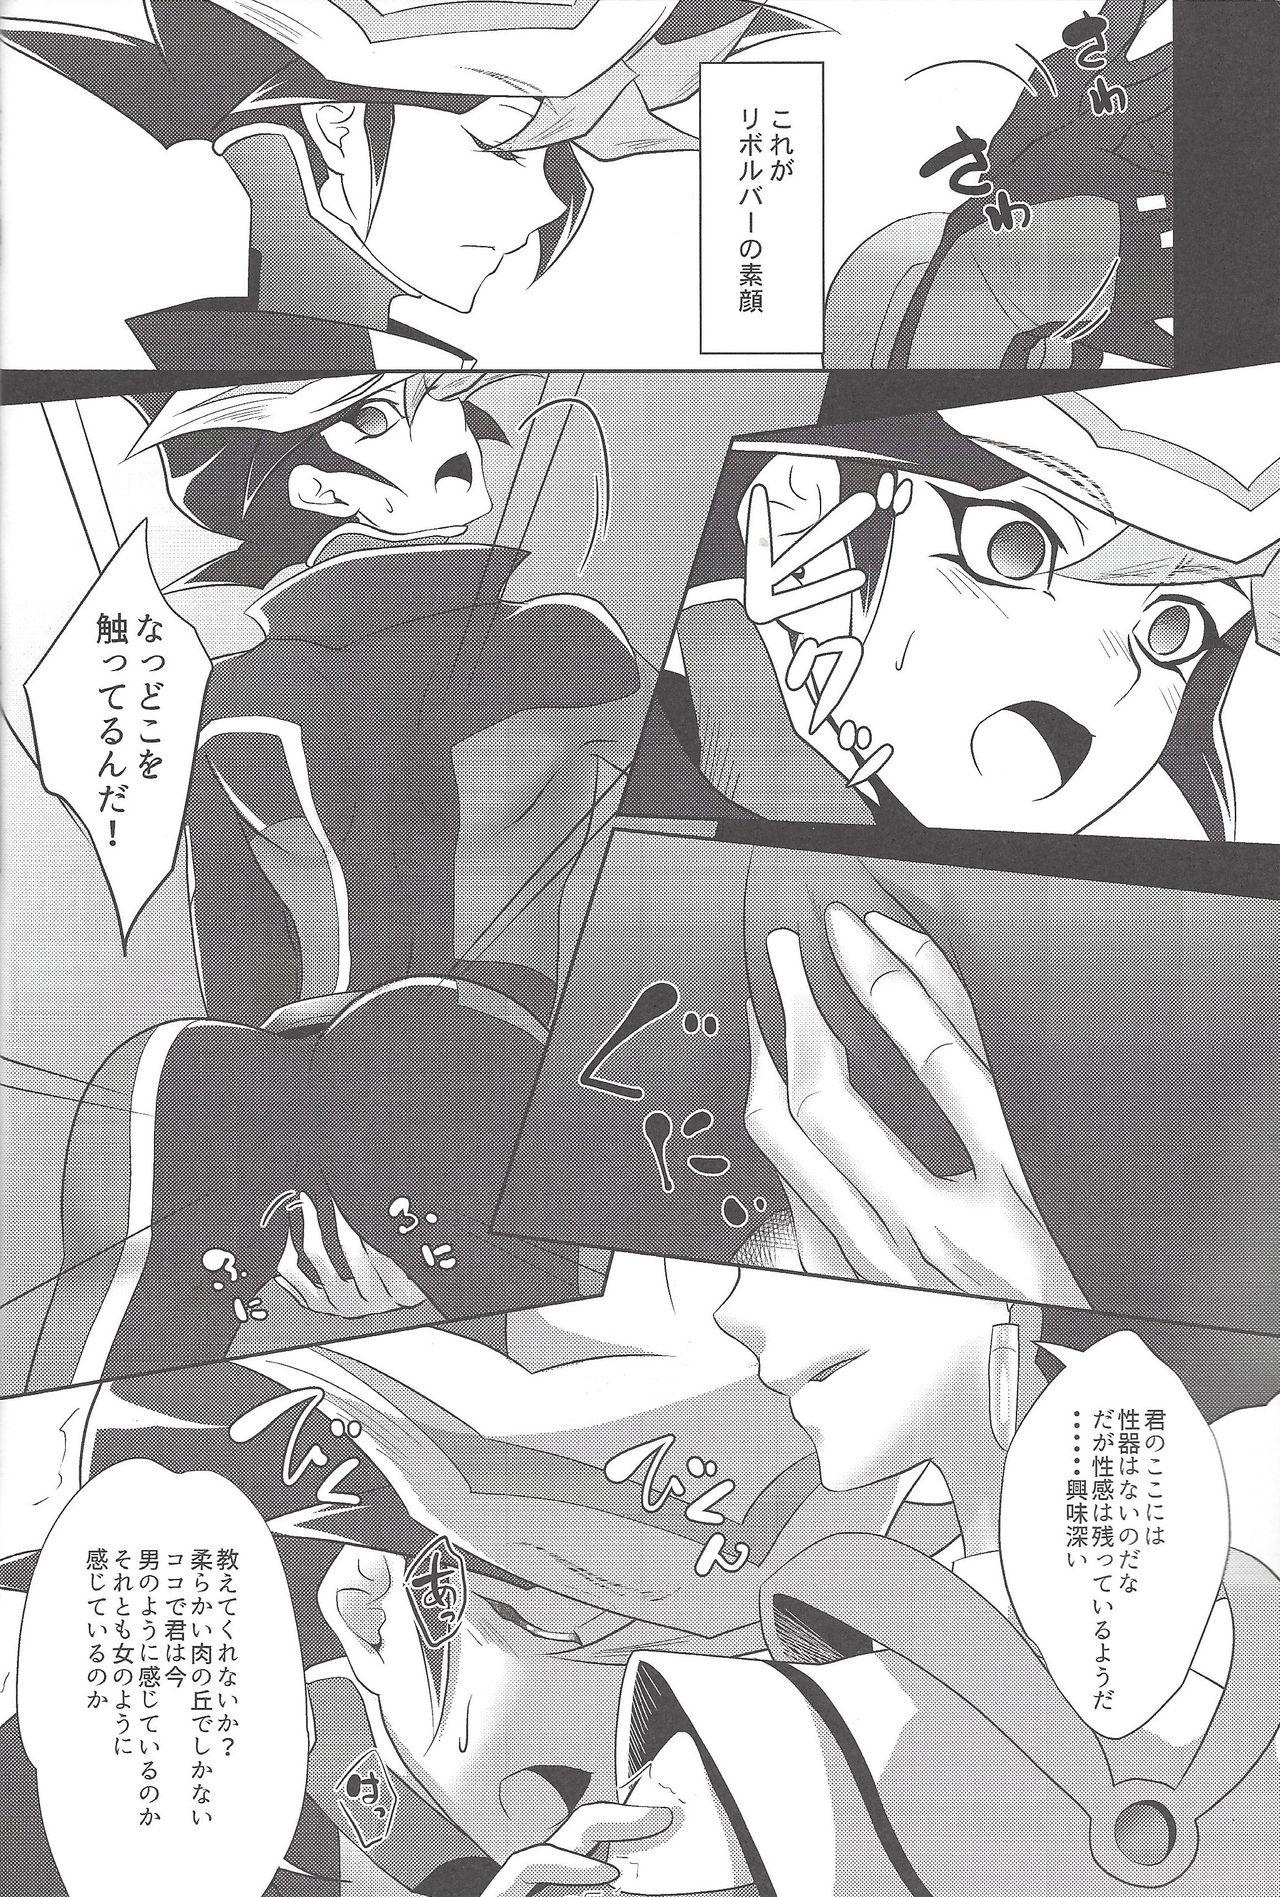 Exgf BlindGame - Yu-gi-oh vrains Girl Sucking Dick - Page 9